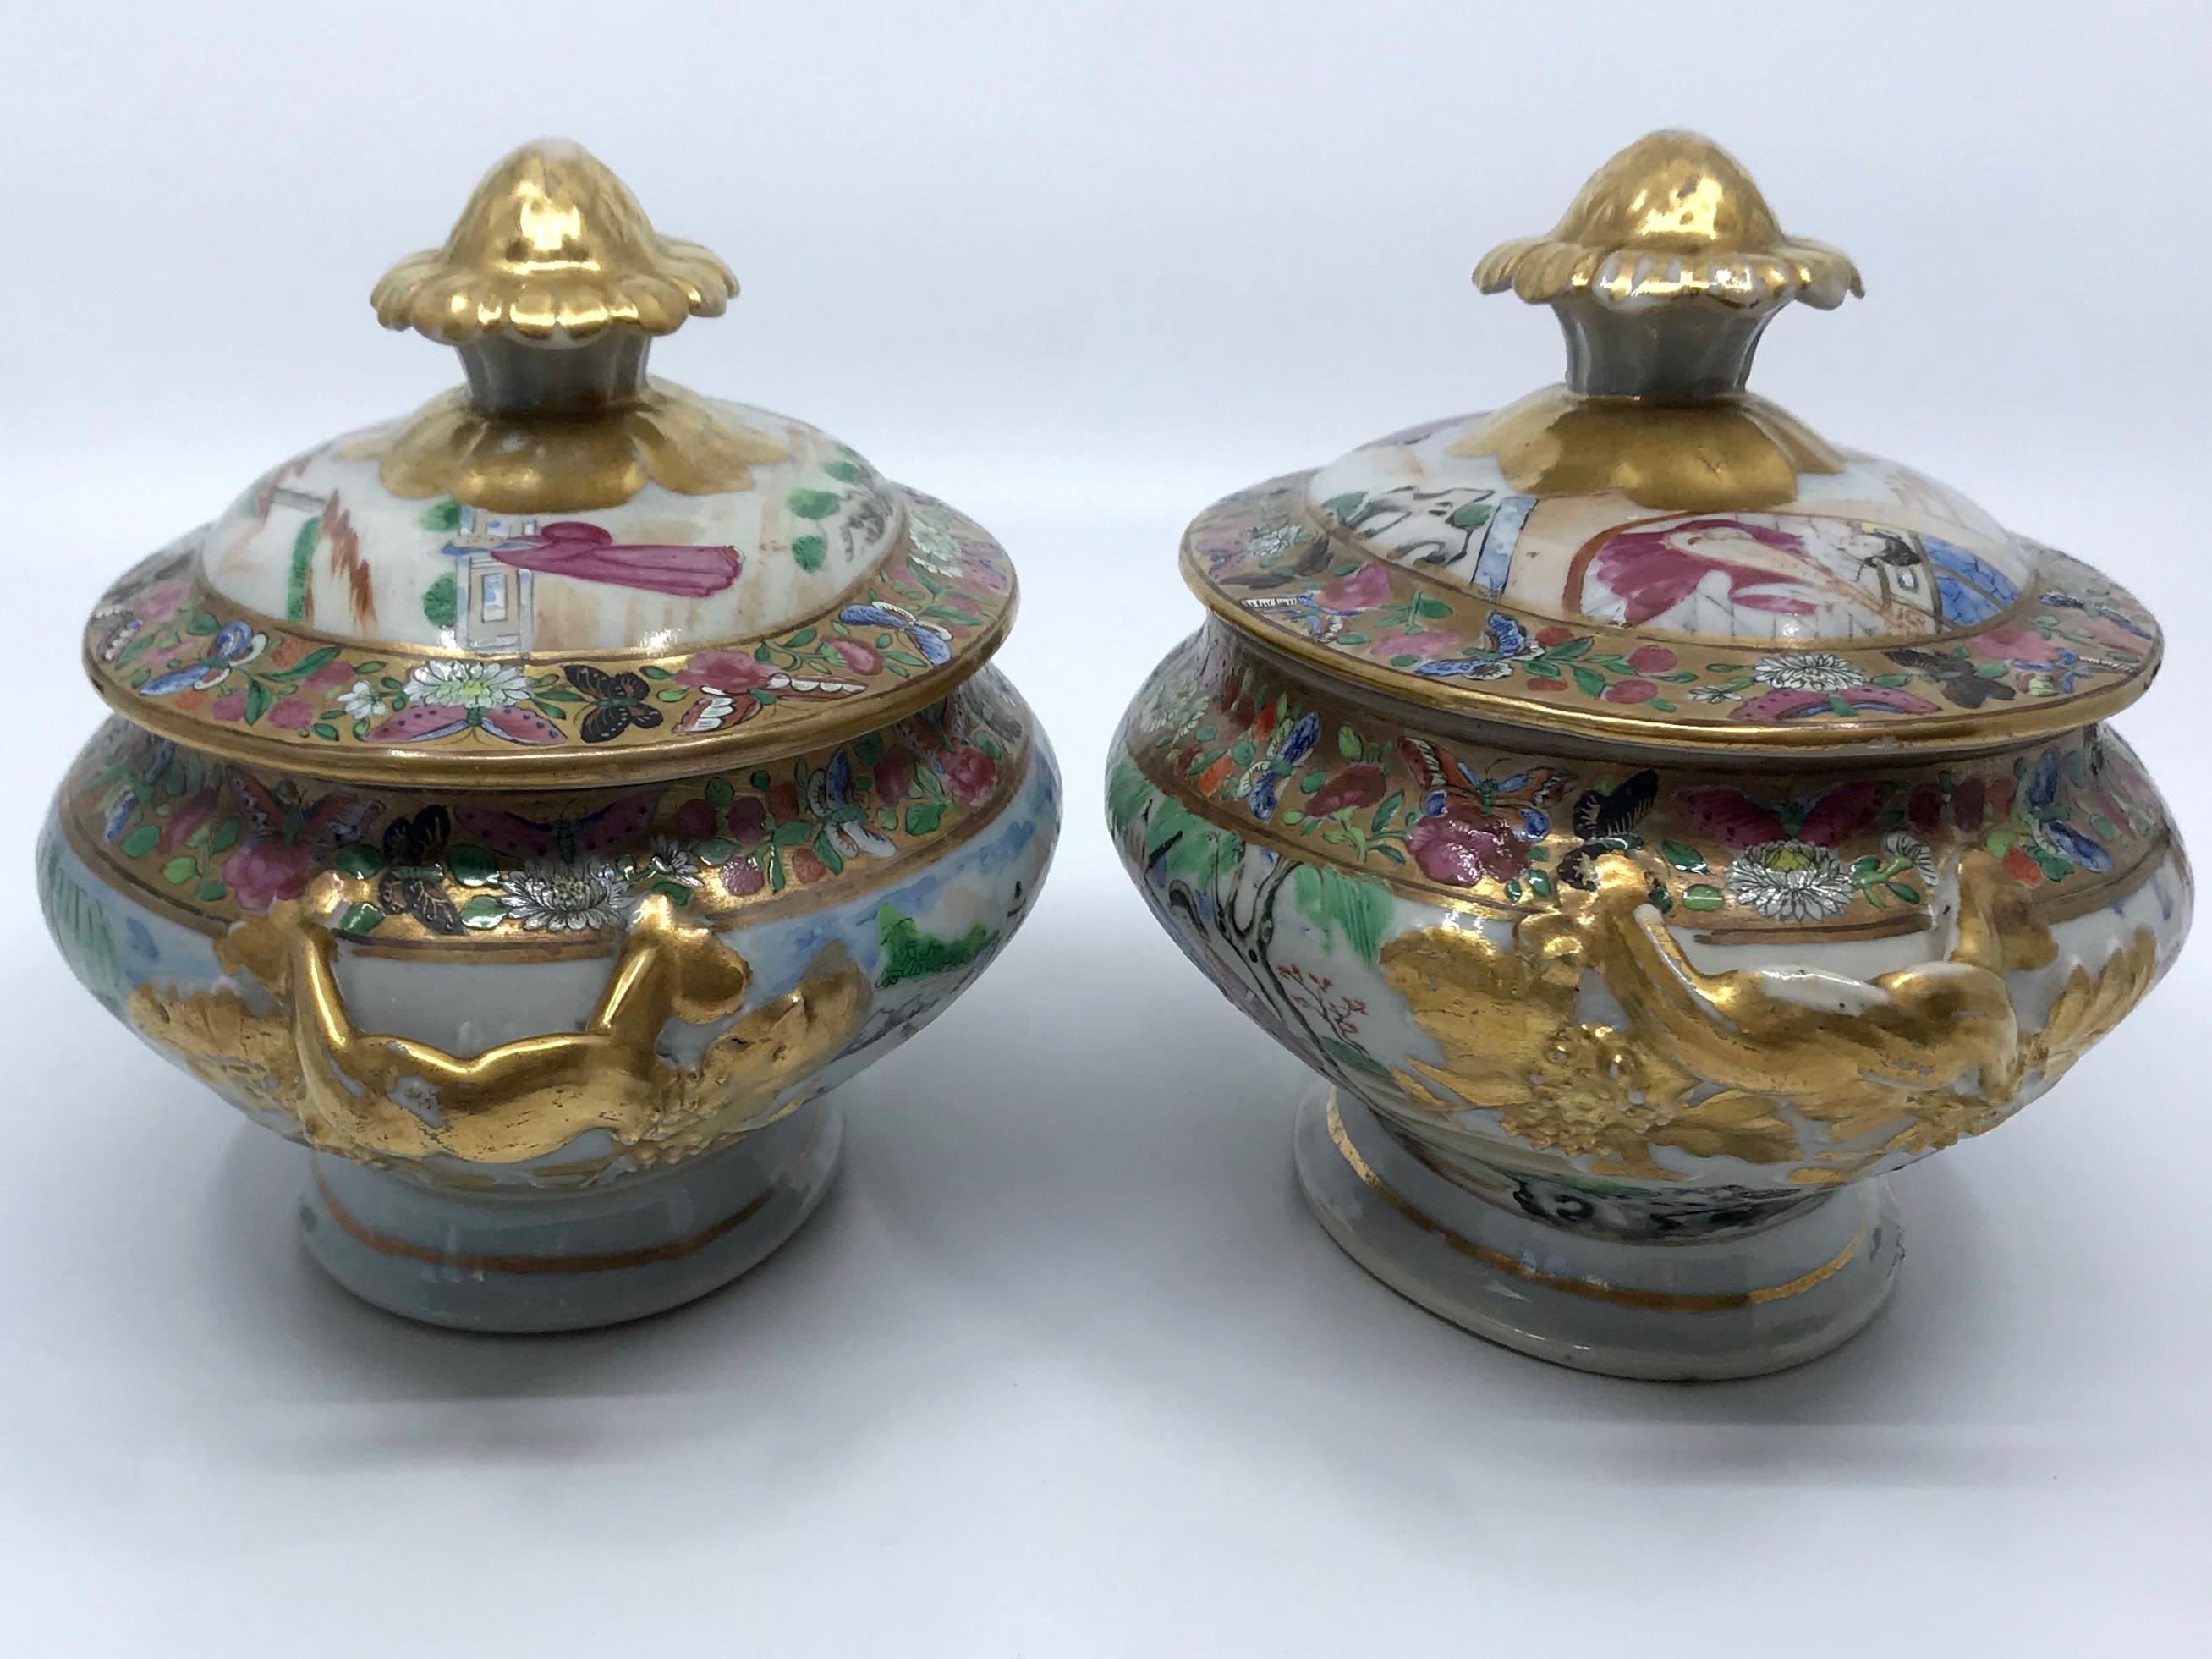 Pair of rose Mandarin Chinese porcelain sauce tureens. Vibrantly hued and gilt painted Chinese Export covered dishes with large gilt floral knopfs on the lids. China, late 19th century
Dimensions: 7.75